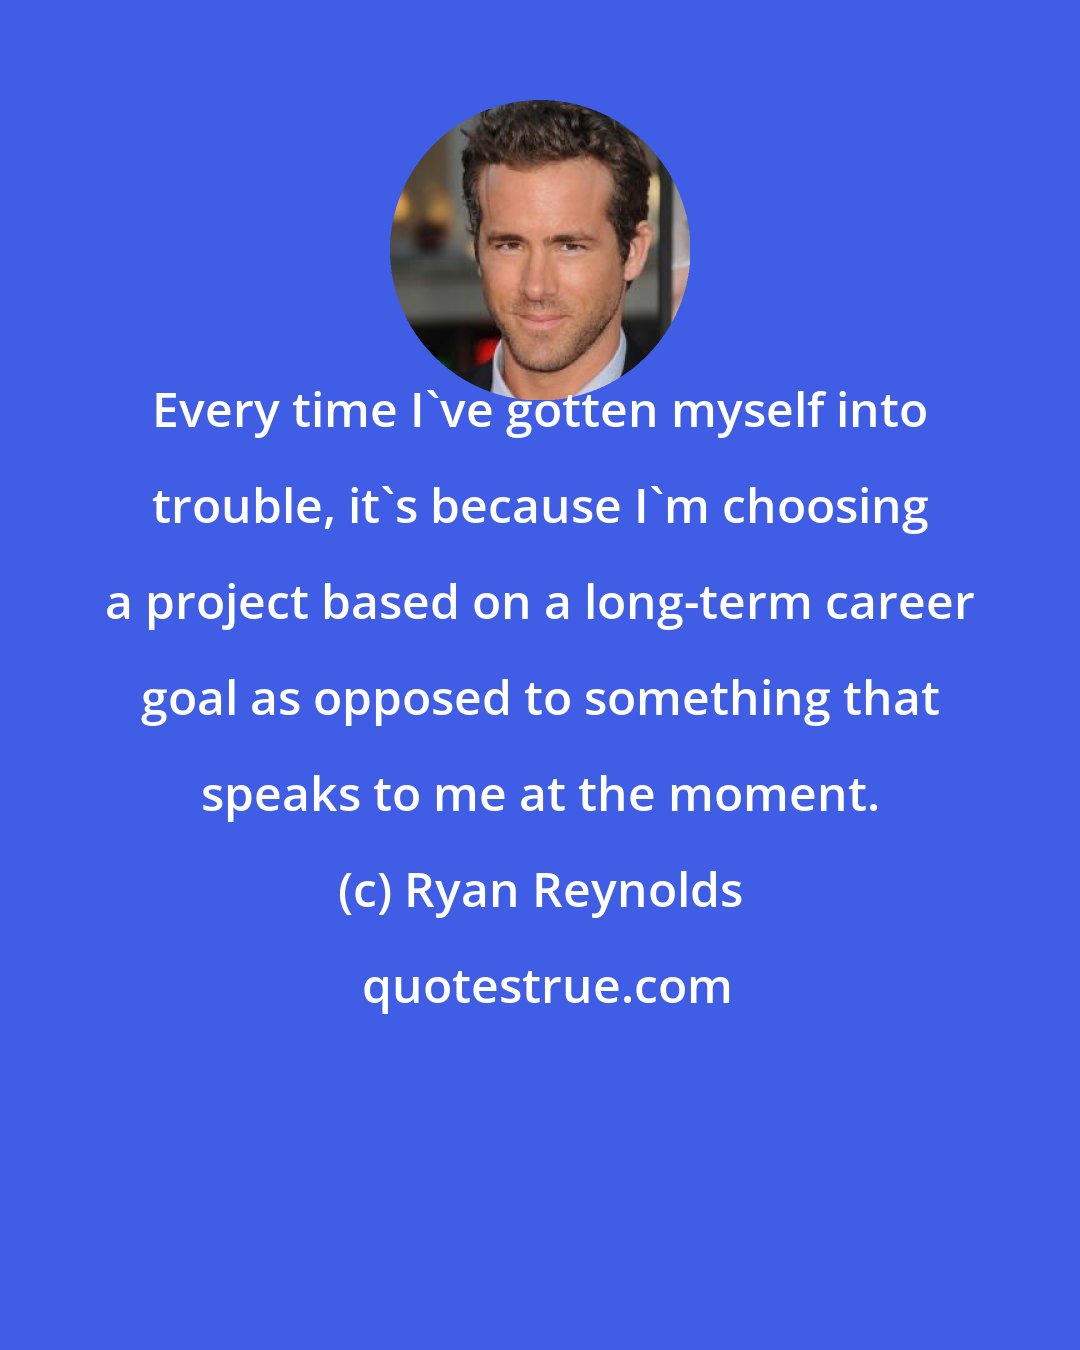 Ryan Reynolds: Every time I've gotten myself into trouble, it's because I'm choosing a project based on a long-term career goal as opposed to something that speaks to me at the moment.